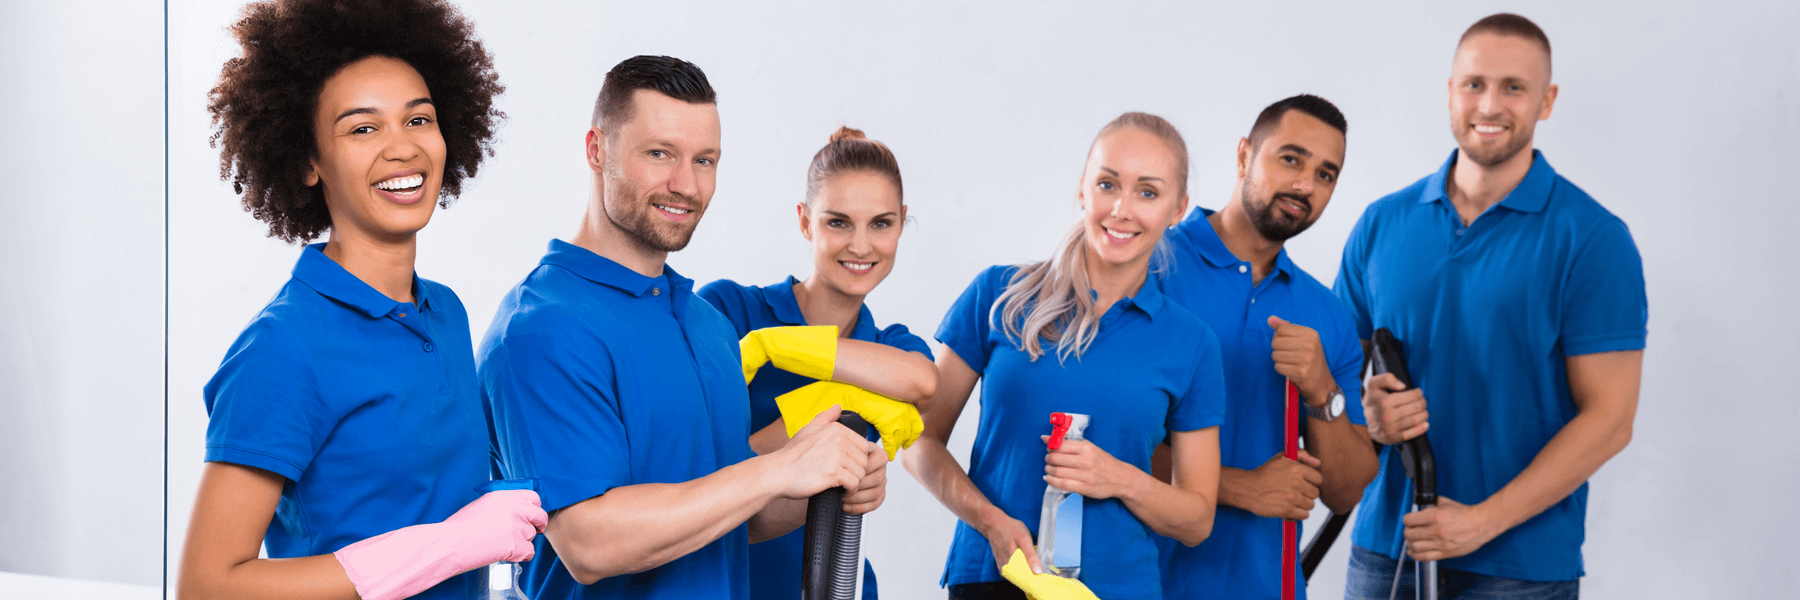 Portrait Of Happy Male And Female Cleaning Crew With Cleaning Equipment